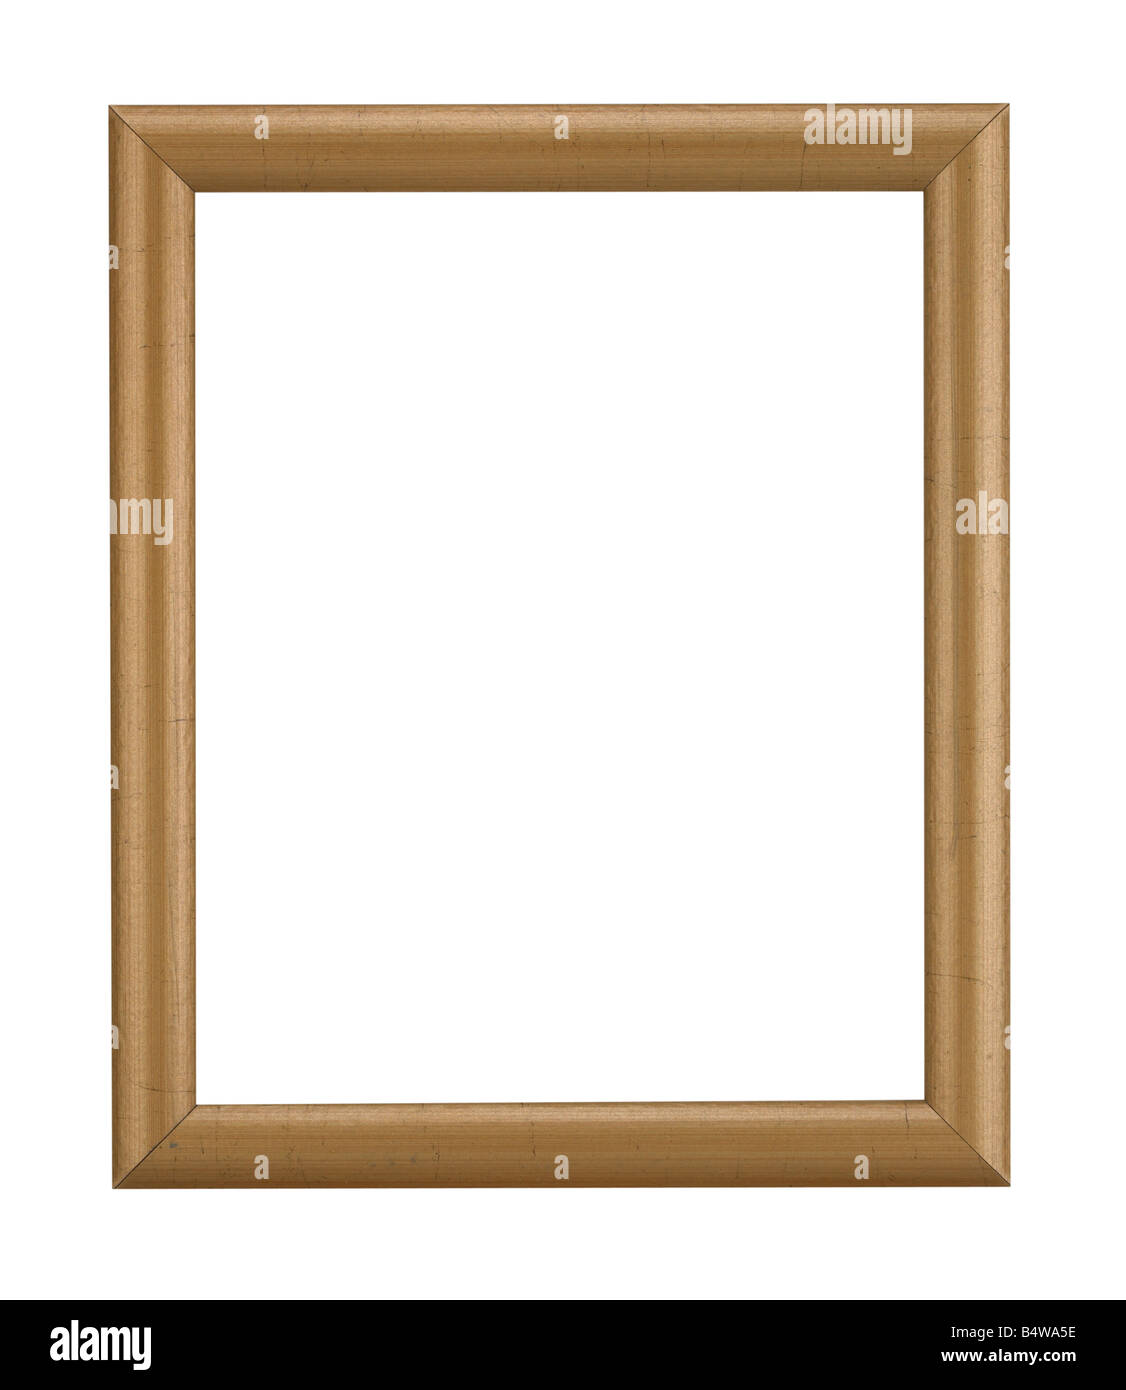 GOLD WOOD PICTURE FRAME Stock Photo